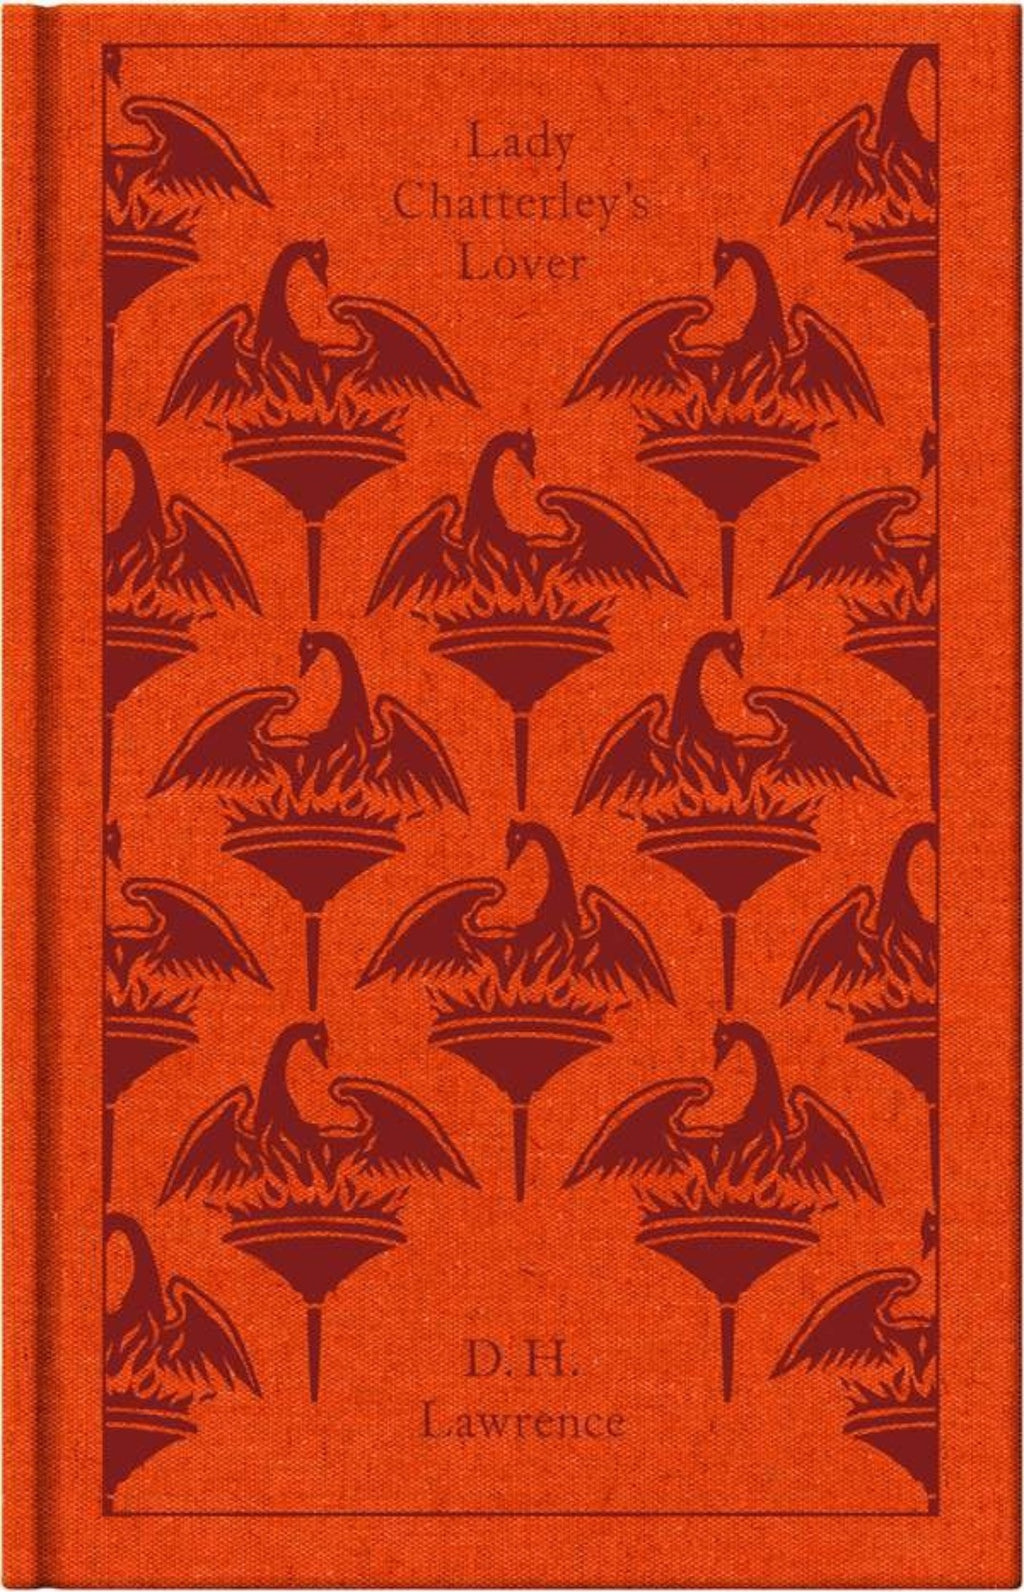 Lady Chatterley's Lover - Penguin Clothbound Classics